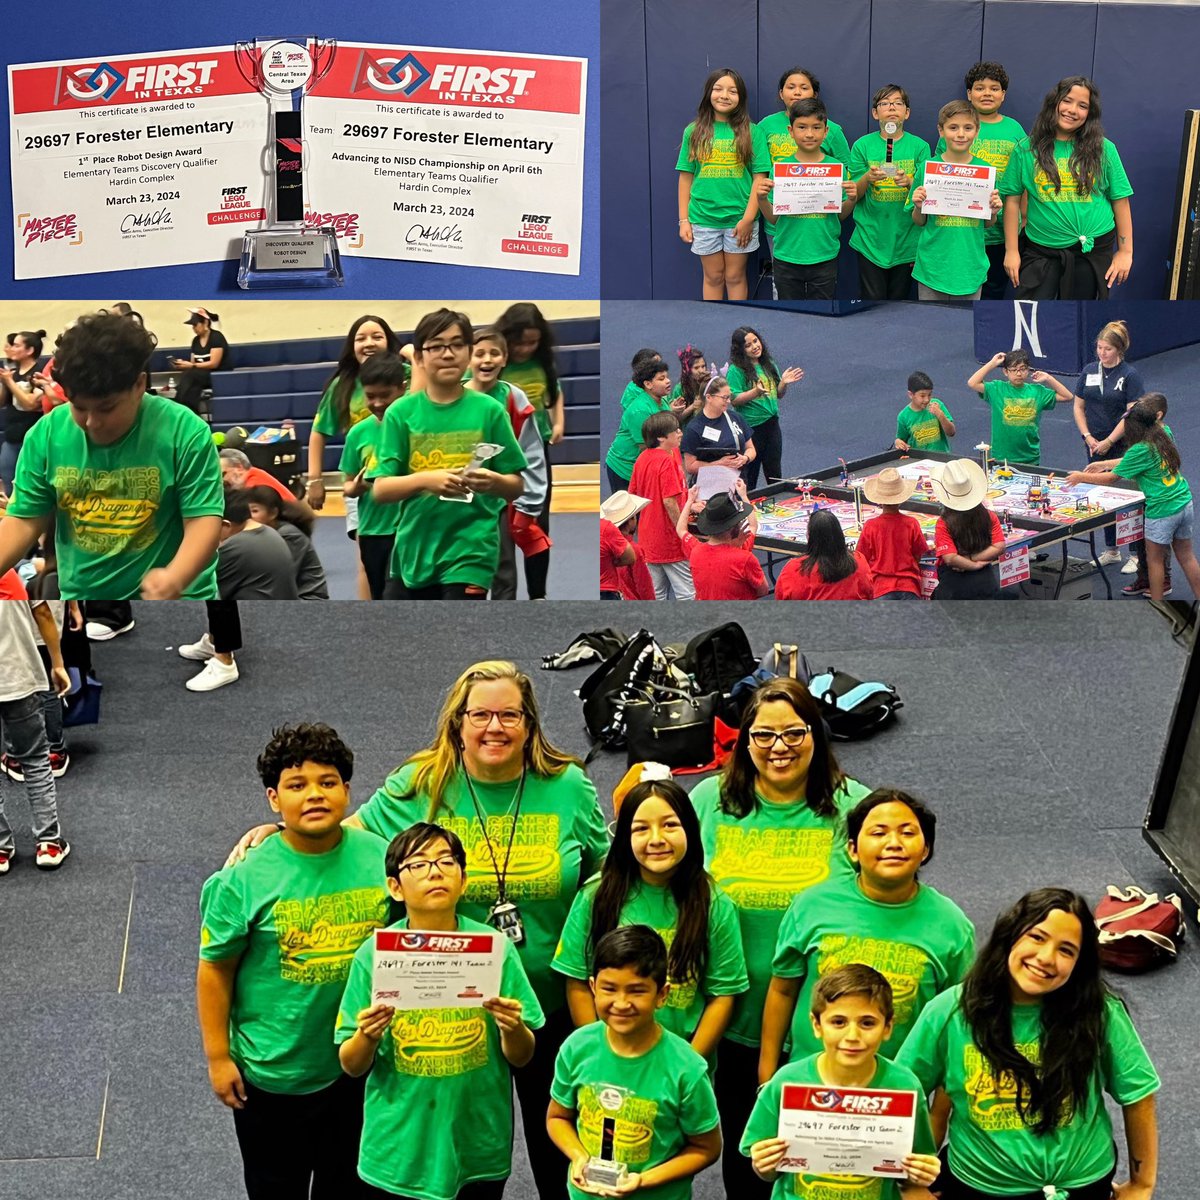 Our Dragons did a great job today at the Robotics competition. They won 1st place for best Robot Design and are advancing to the @nisd championship! Mrs. Buente and Mrs. Quintanilla did a phenomenal job getting the team ready. We cant wait to see what they do next! 🐲🐲🐲